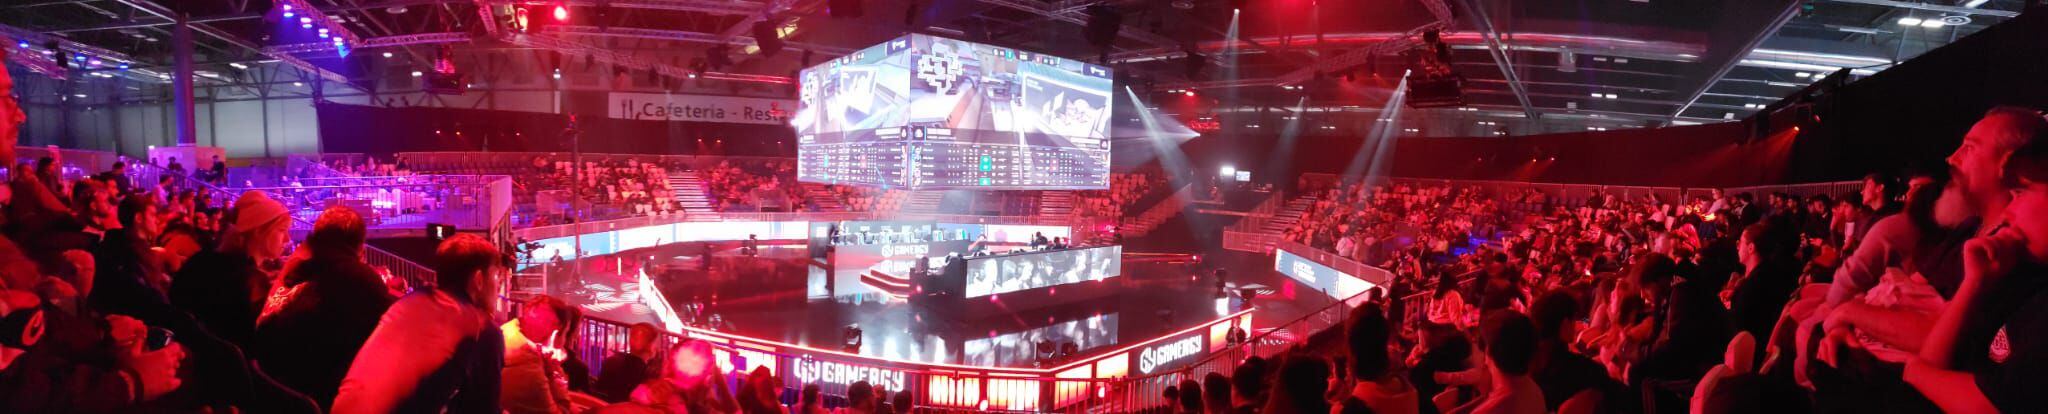 The Gamergy central arena at the Ifema events center in Madrid, Spain.